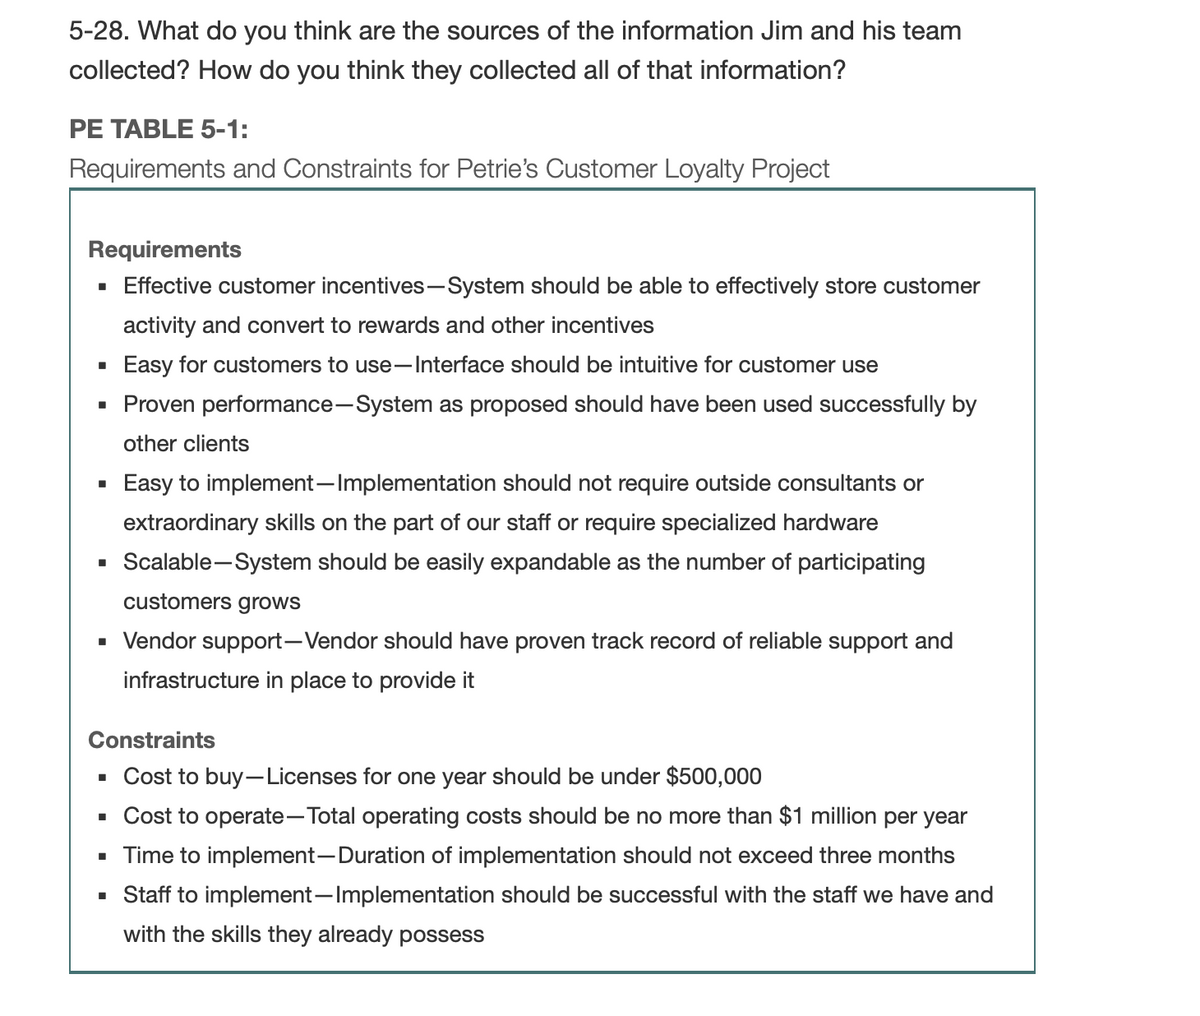 5-28. What do you think are the sources of the information Jim and his team
collected? How do you think they collected all of that information?
PE TABLE 5-1:
Requirements and Constraints for Petrie's Customer Loyalty Project
Requirements
· Effective customer incentives-System should be able to effectively store customer
activity and convert to rewards and other incentives
Easy for customers to use-Interface should be intuitive for customer use
· Proven performance-System as proposed should have been used successfully by
other clients
Easy to implement-Implementation should not require outside consultants or
extraordinary skills on the part of our staff or require specialized hardware
Scalable-System should be easily expandable as the number of participating
customers grows
• Vendor support-Vendor should have proven track record of reliable support and
infrastructure in place to provide it
Constraints
• Cost to buy-Licenses for one year should be under $500,000
• Cost to operate- Total operating costs should be no more than $1 million per year
• Time to implement- Duration of implementation should not exceed three months
· Staff to implement-Implementation should be successful with the staff we have and
with the skills they already possess
